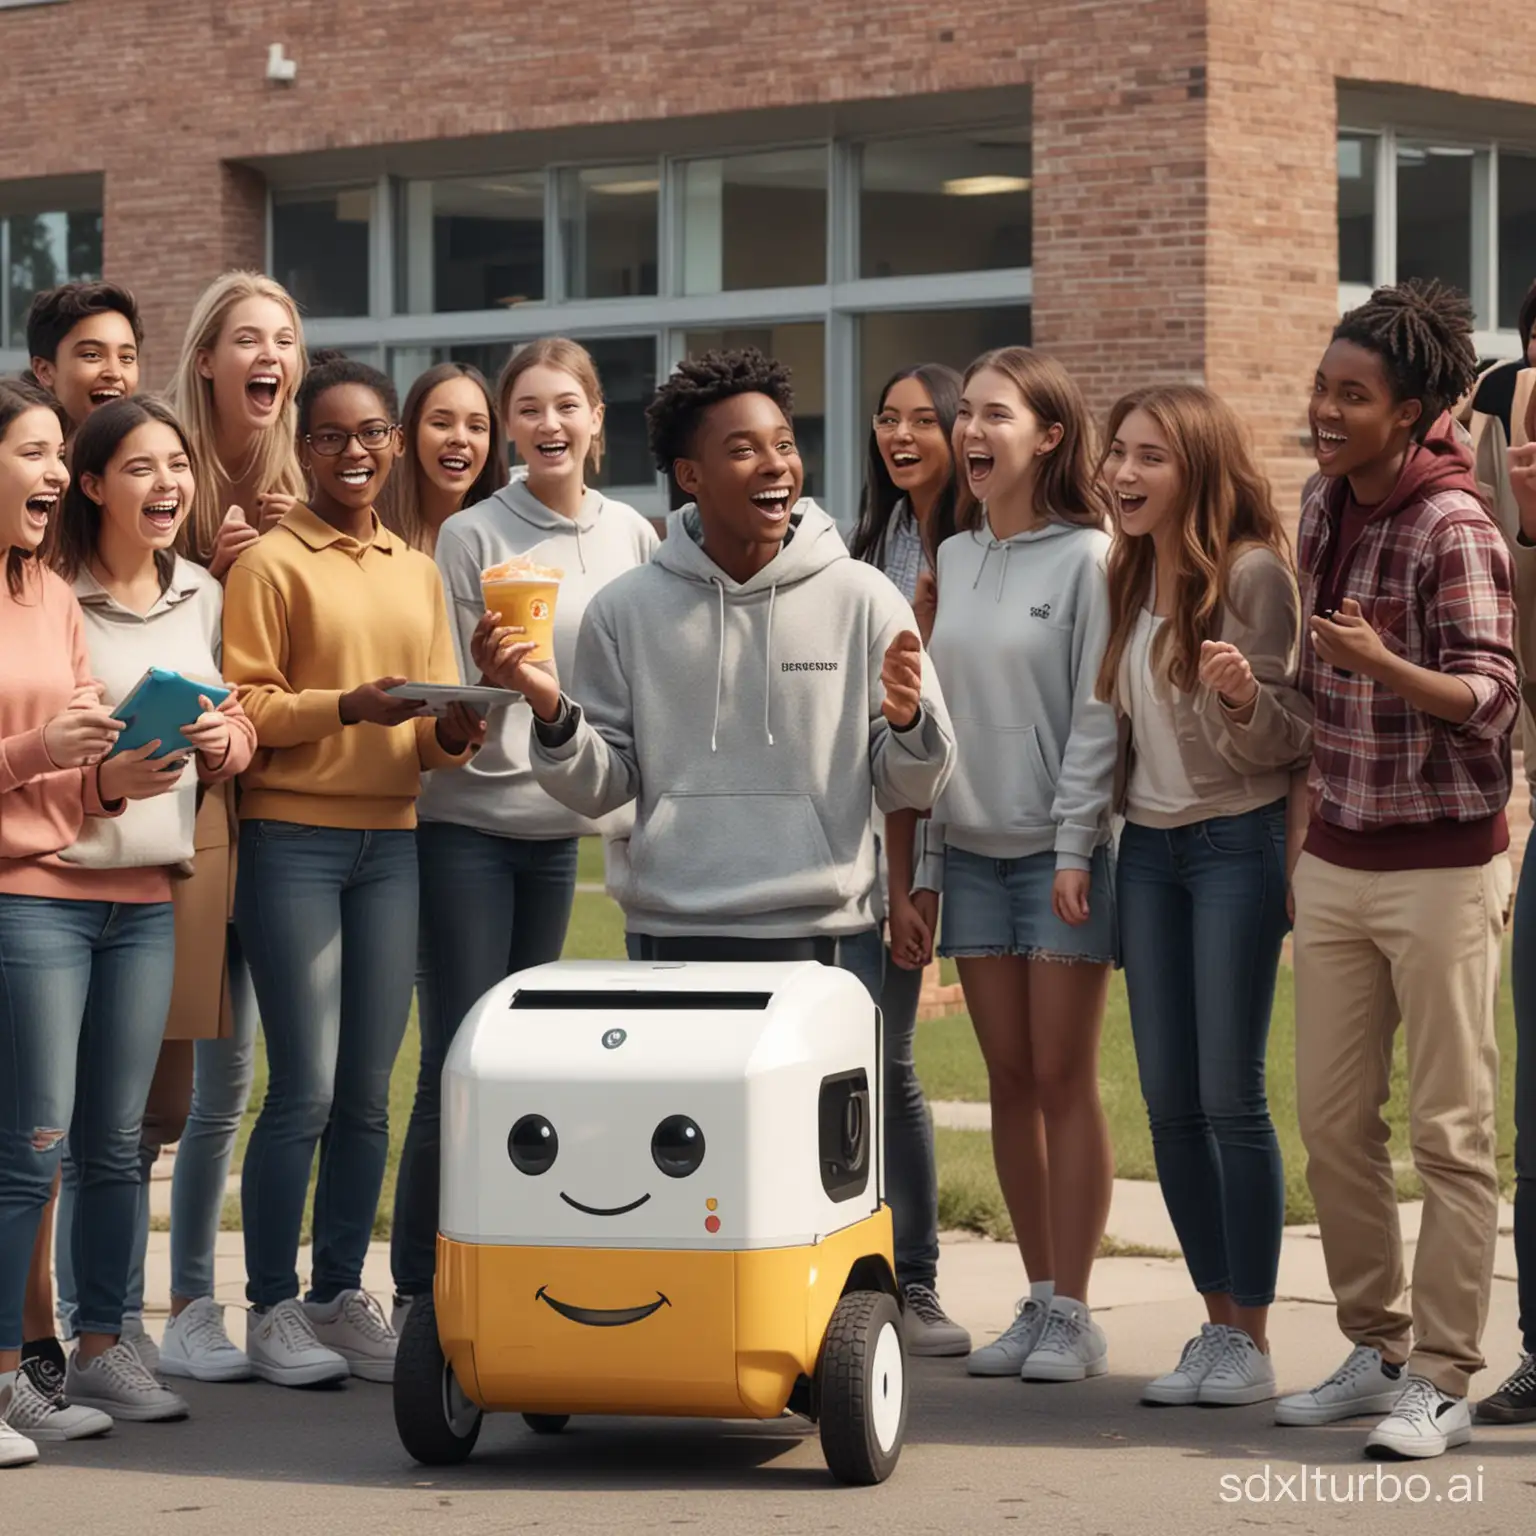 Diverse-Students-Reacting-to-Smiling-Food-Delivery-Robot